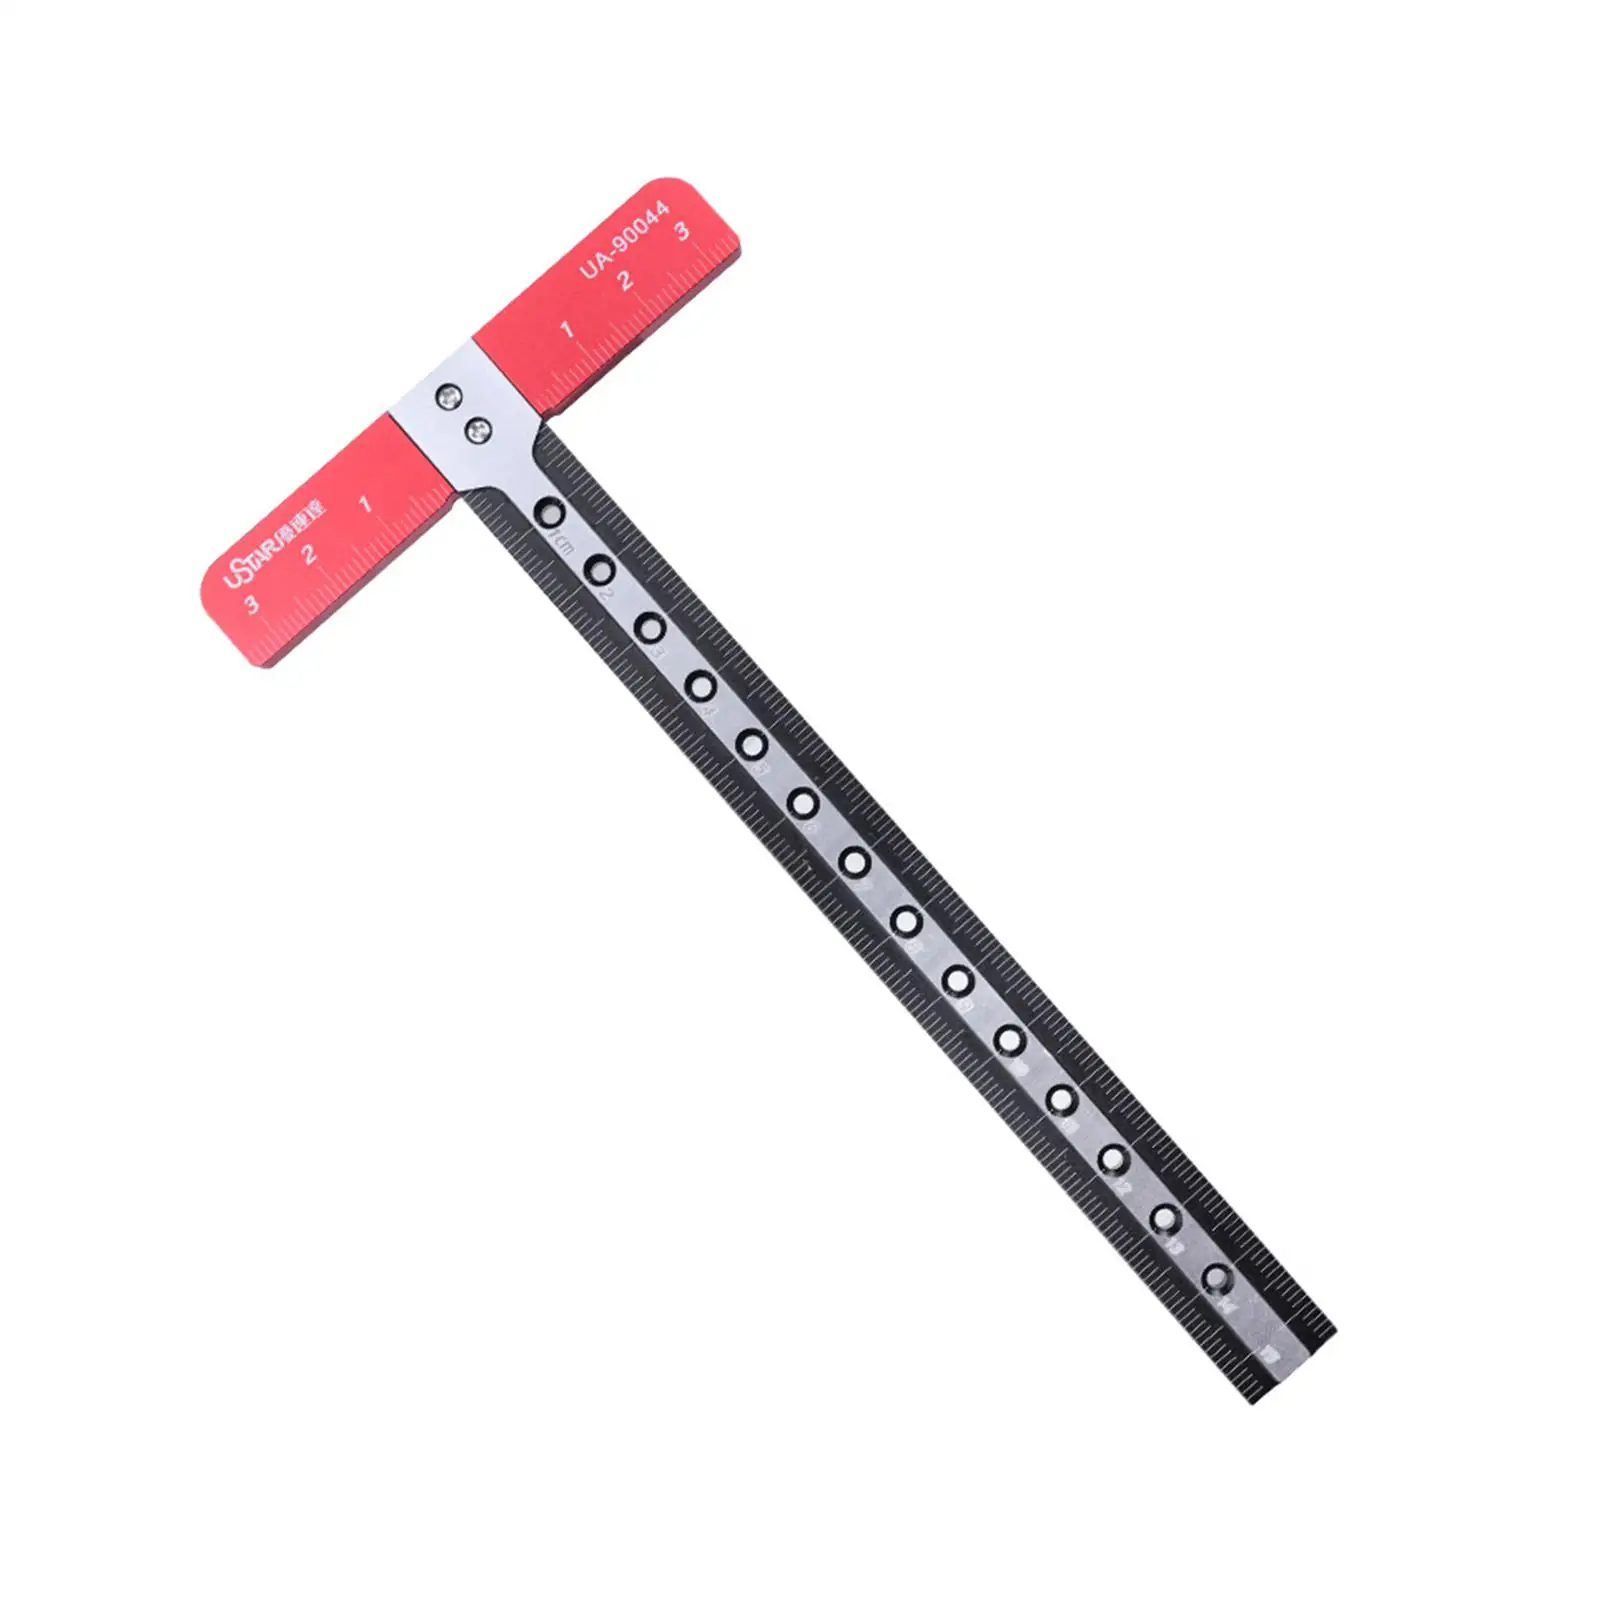 T Square Ruler CNC Technology Scale Ruler Precise Angle Measure Tools Shape Positioning Ruler -90044 for Art Framing DIY Hobby